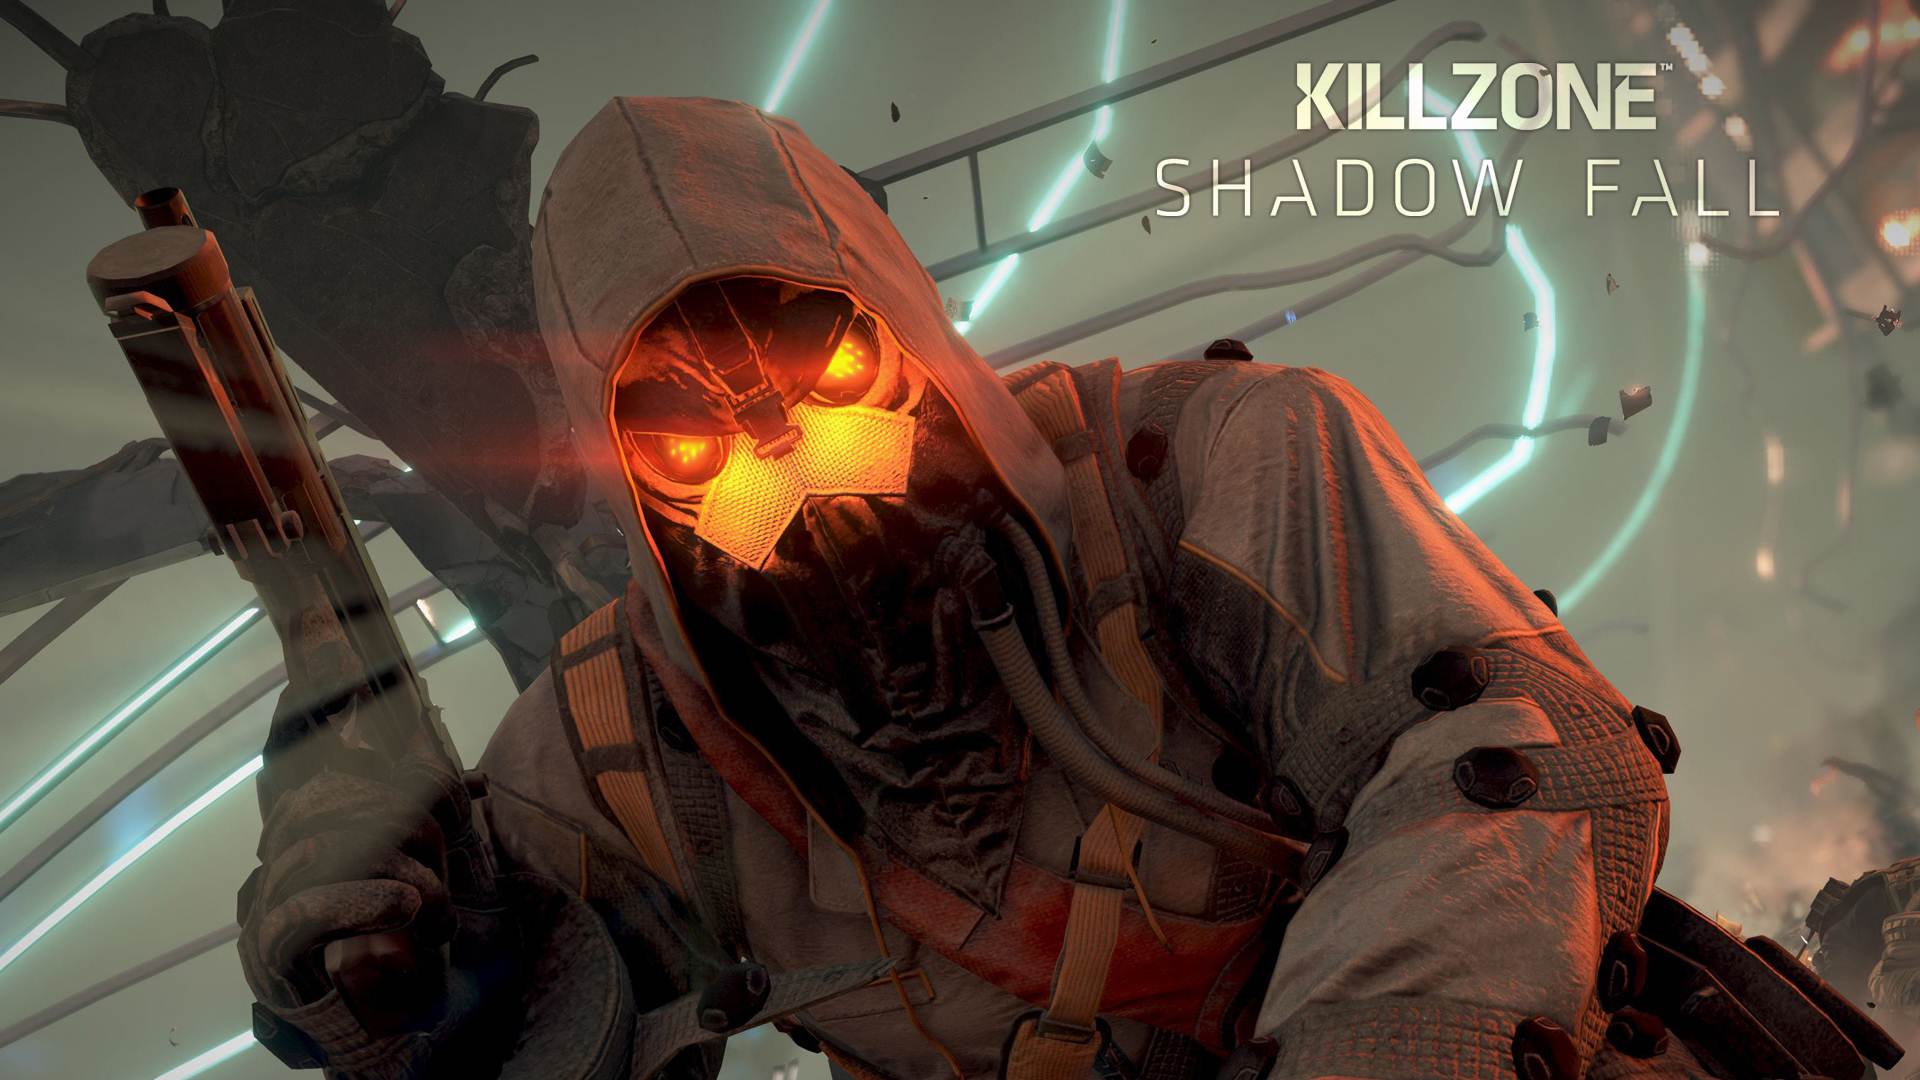 Killzone: Shadow Fall has roughly 200 players online Gimme